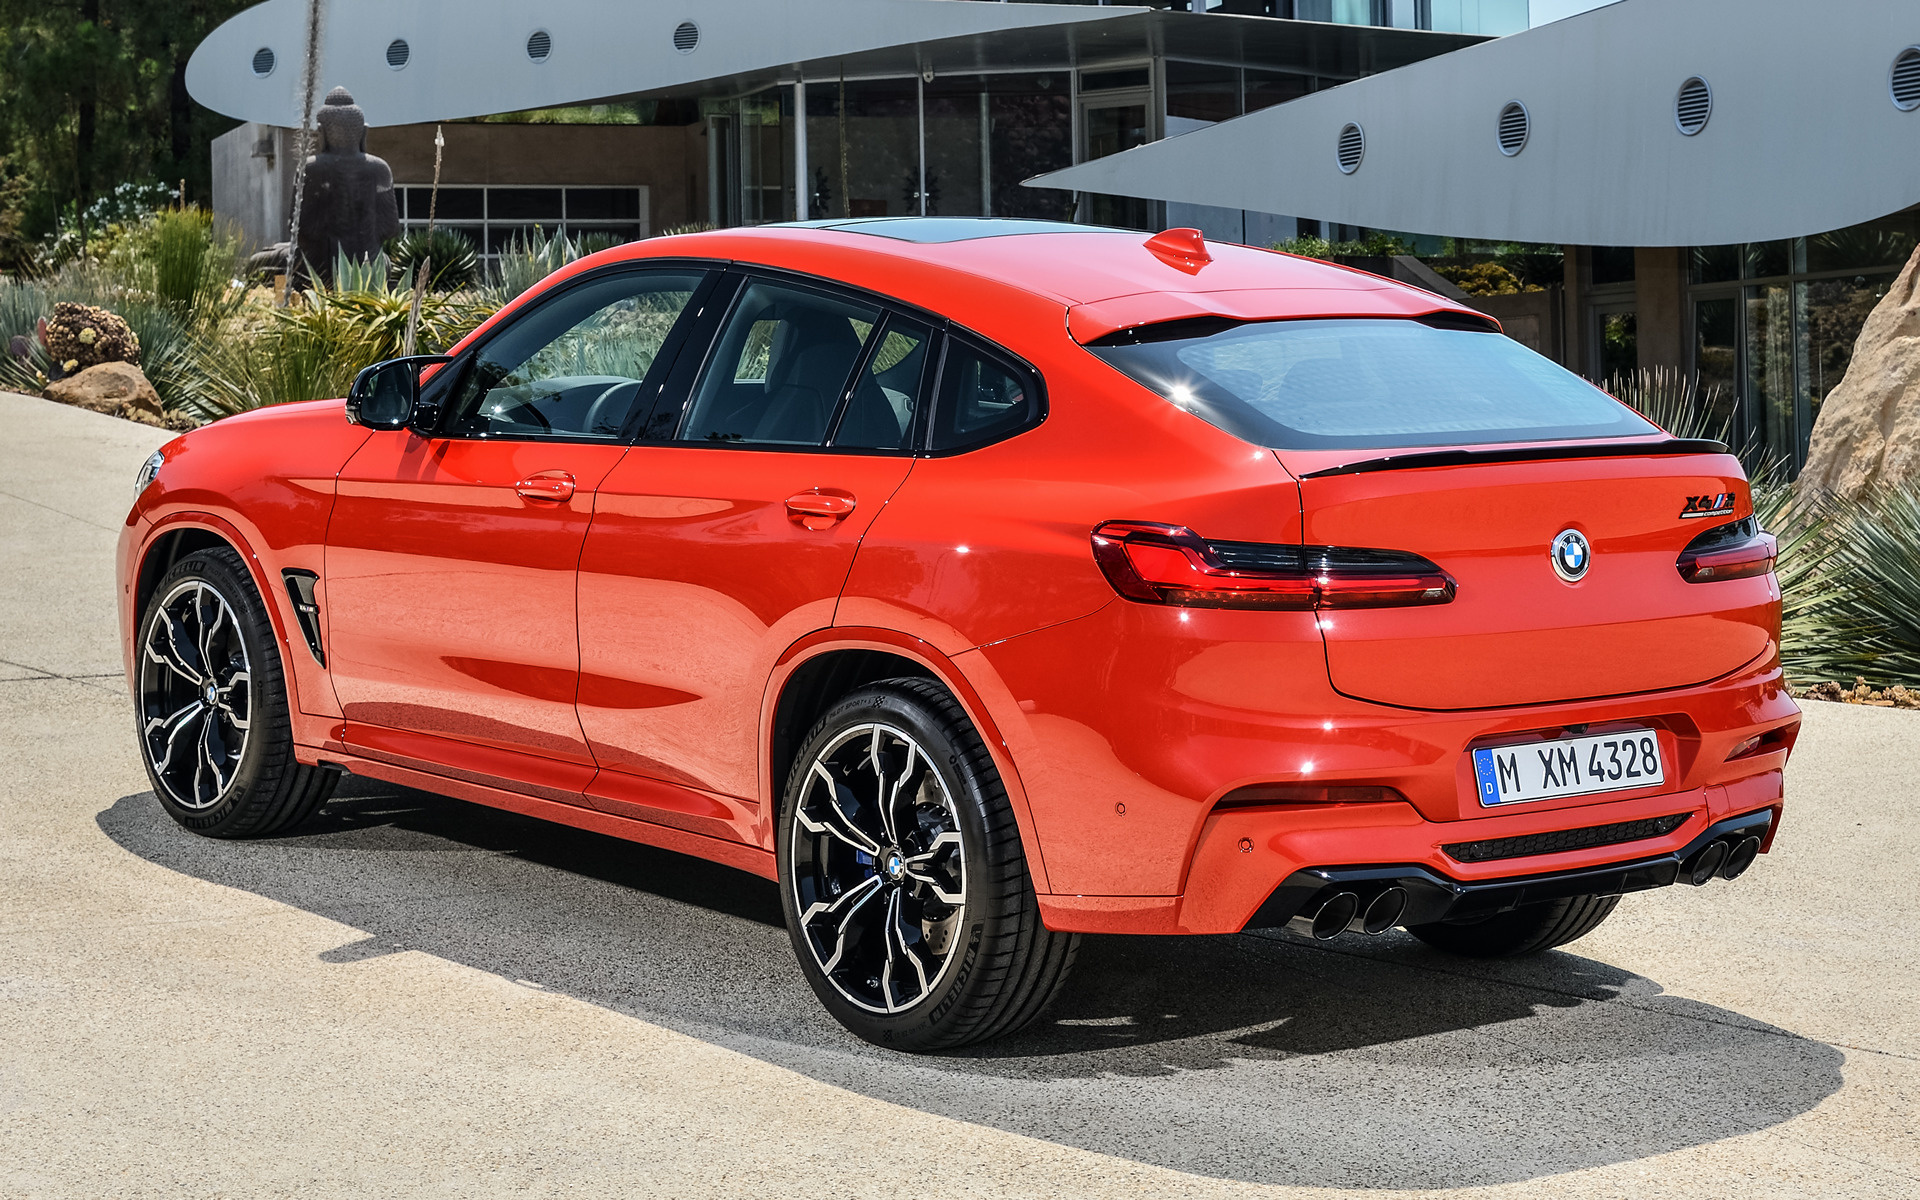 New x 4. BMW x4 m40i 2019. BMW x4m 2021. БМВ x4m 2022. БМВ x4 m Competition.